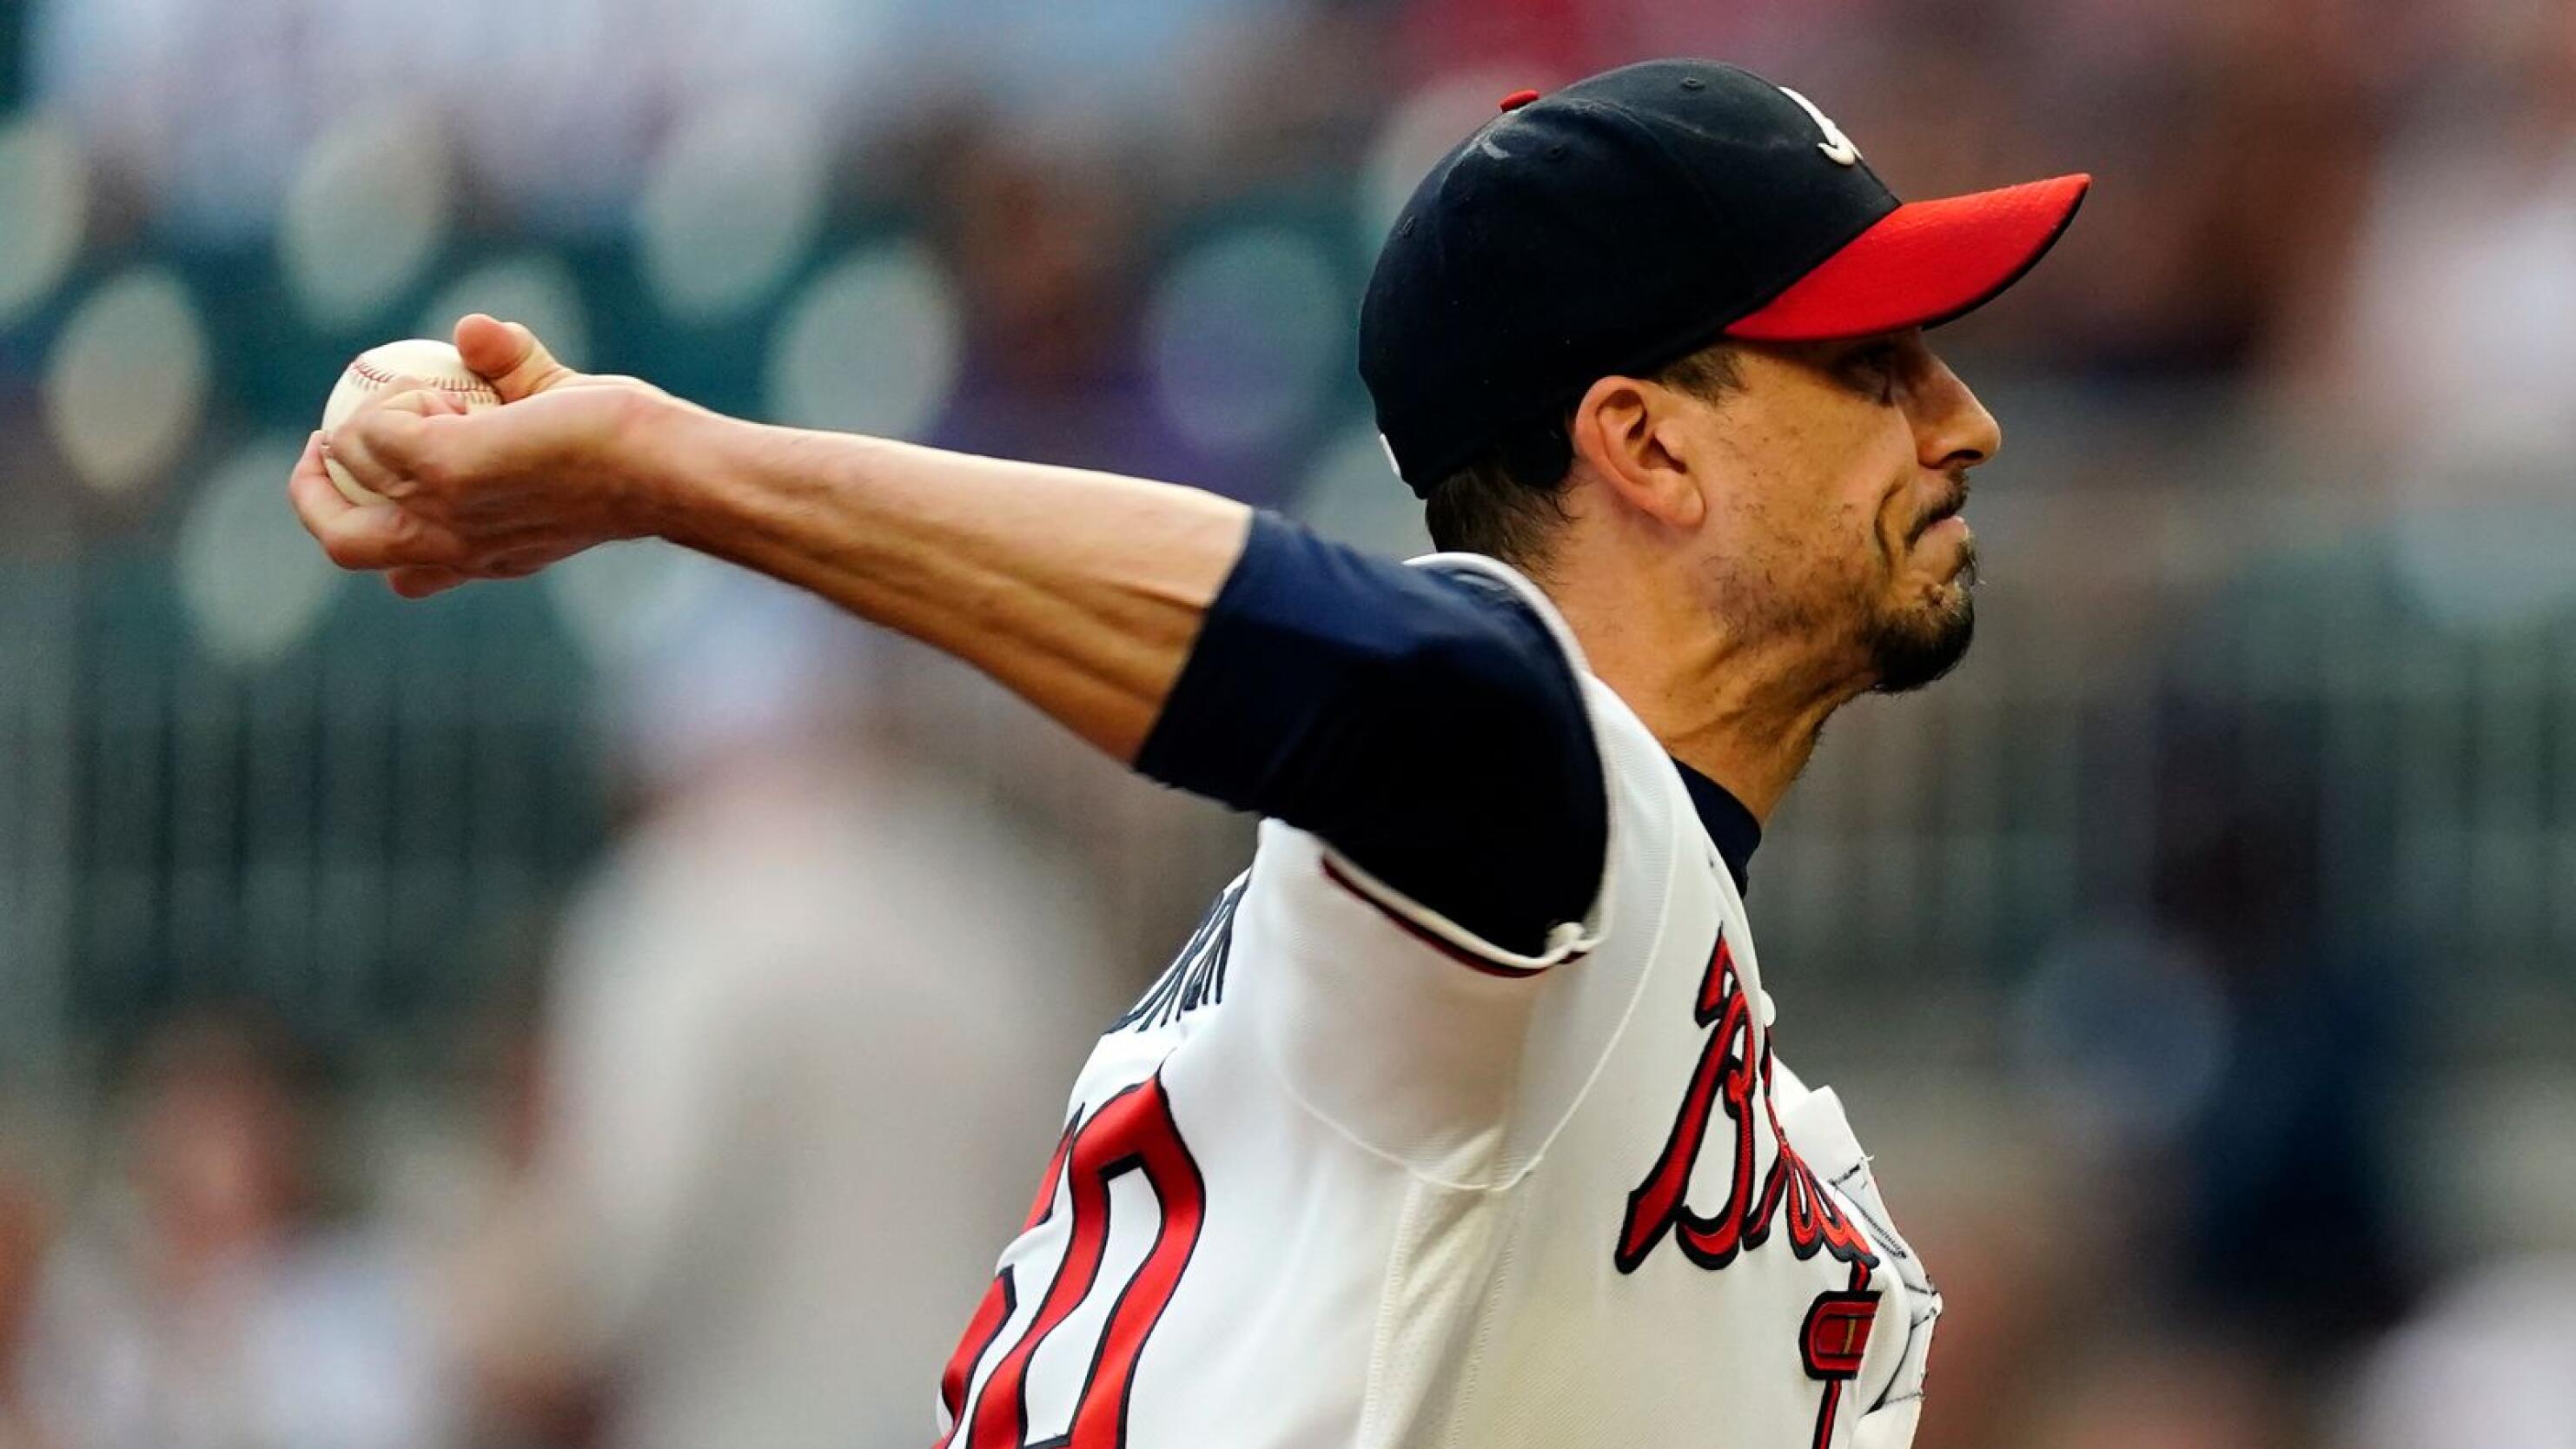 Charlie Morton Braves World Series pitcher, 5 things to know